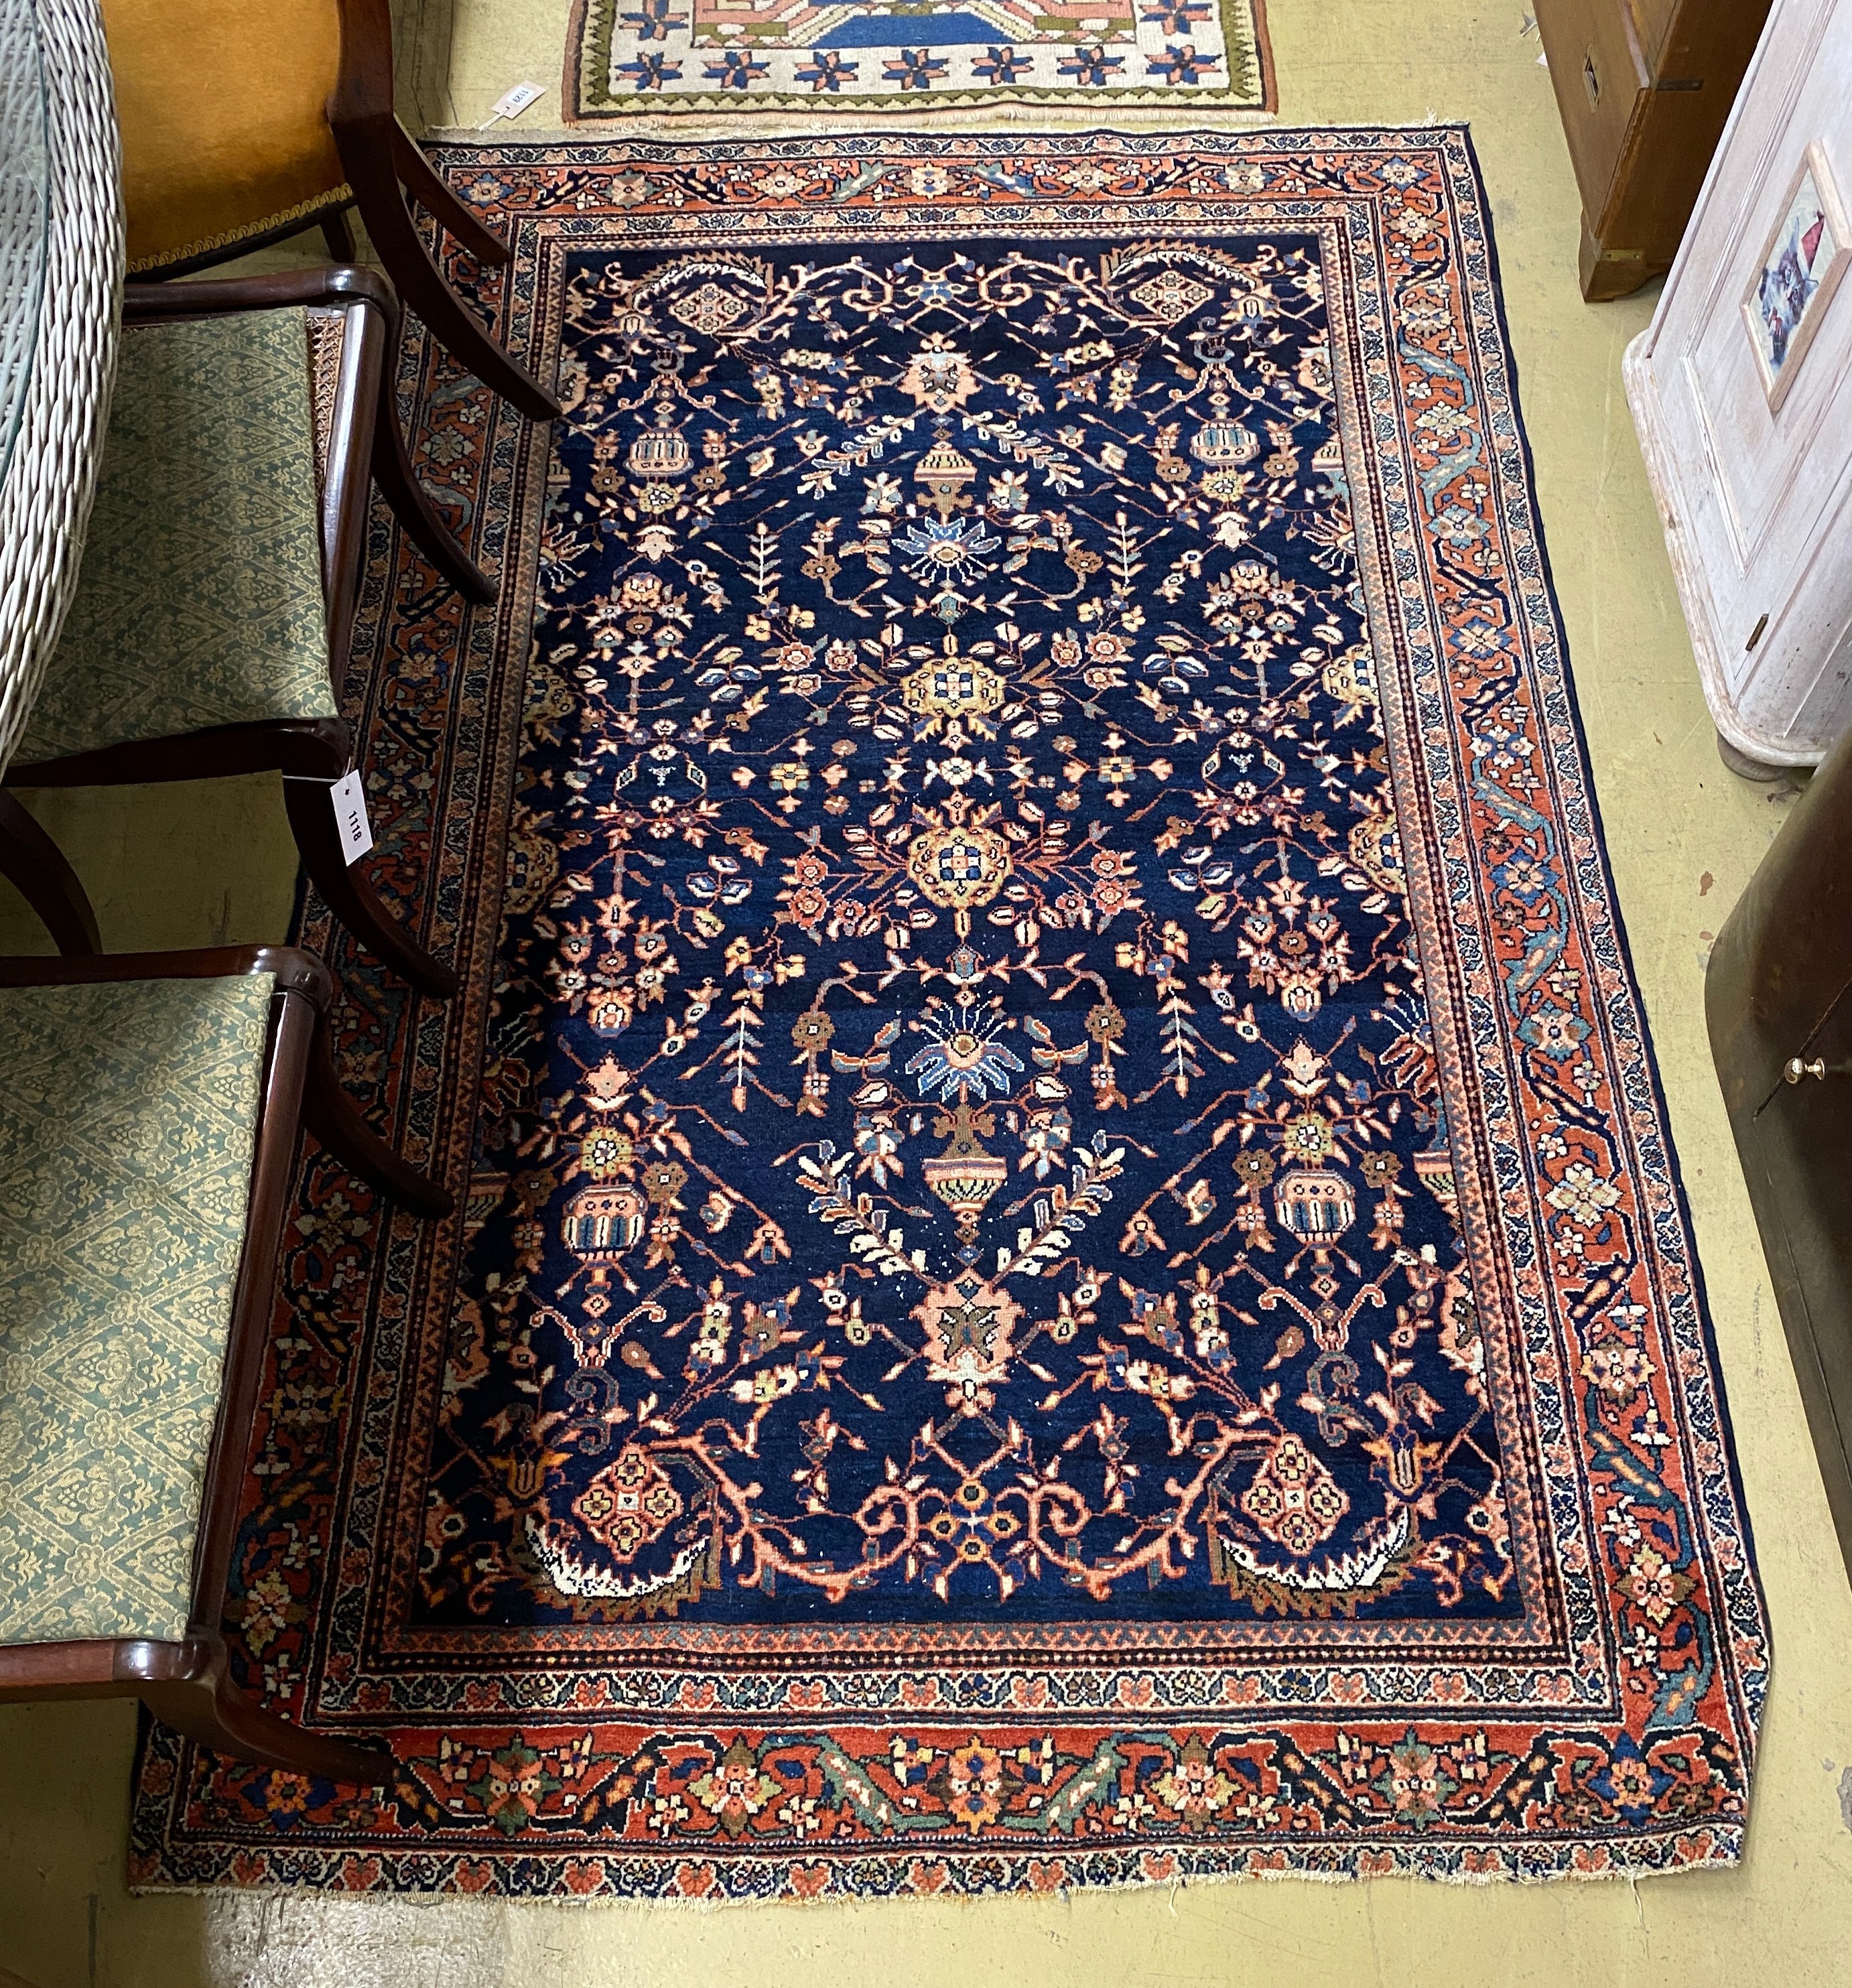 A North West Persian blue ground rug, 200 x 130cm